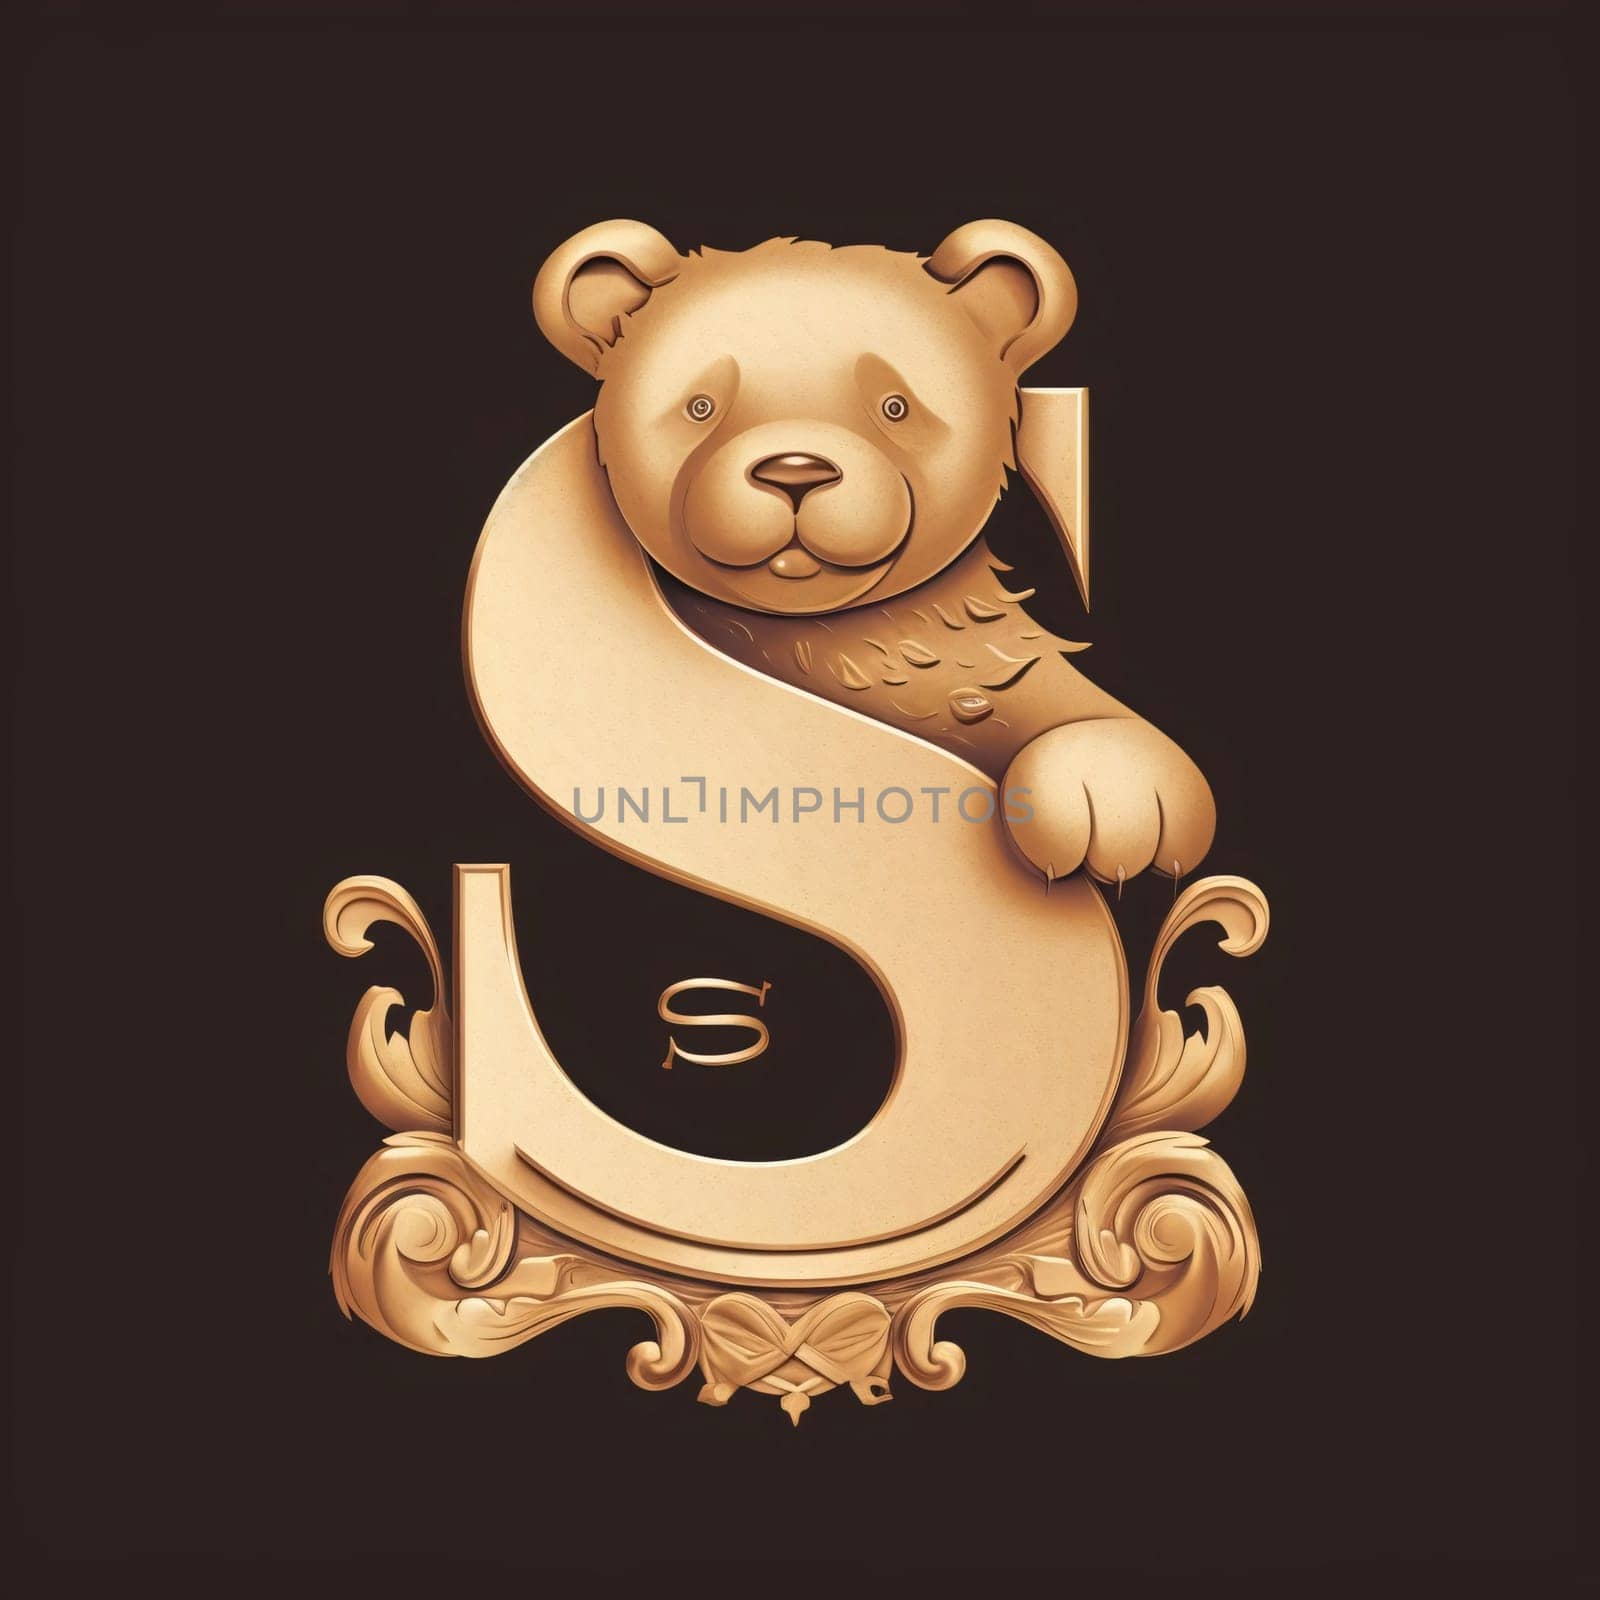 Graphic alphabet letters: Letter S with teddy bear. 3D illustration. Vintage style.